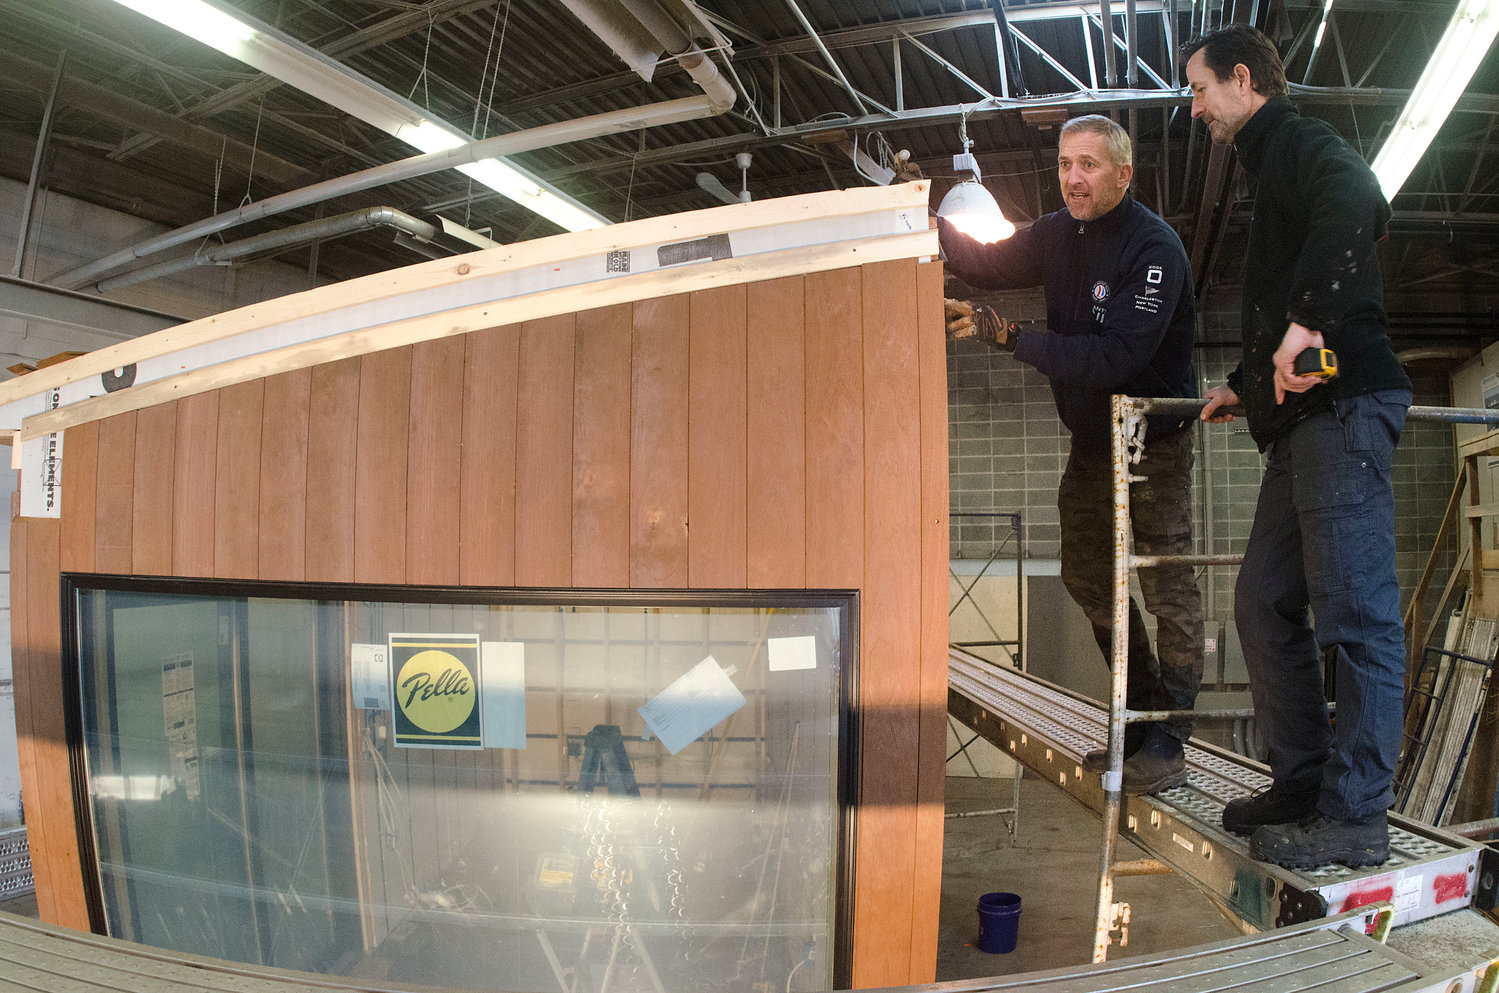 Andrew Naperotic (right) and Anders Hansen work on one of the ADDASPACE living/working units inside their Bristol facility.